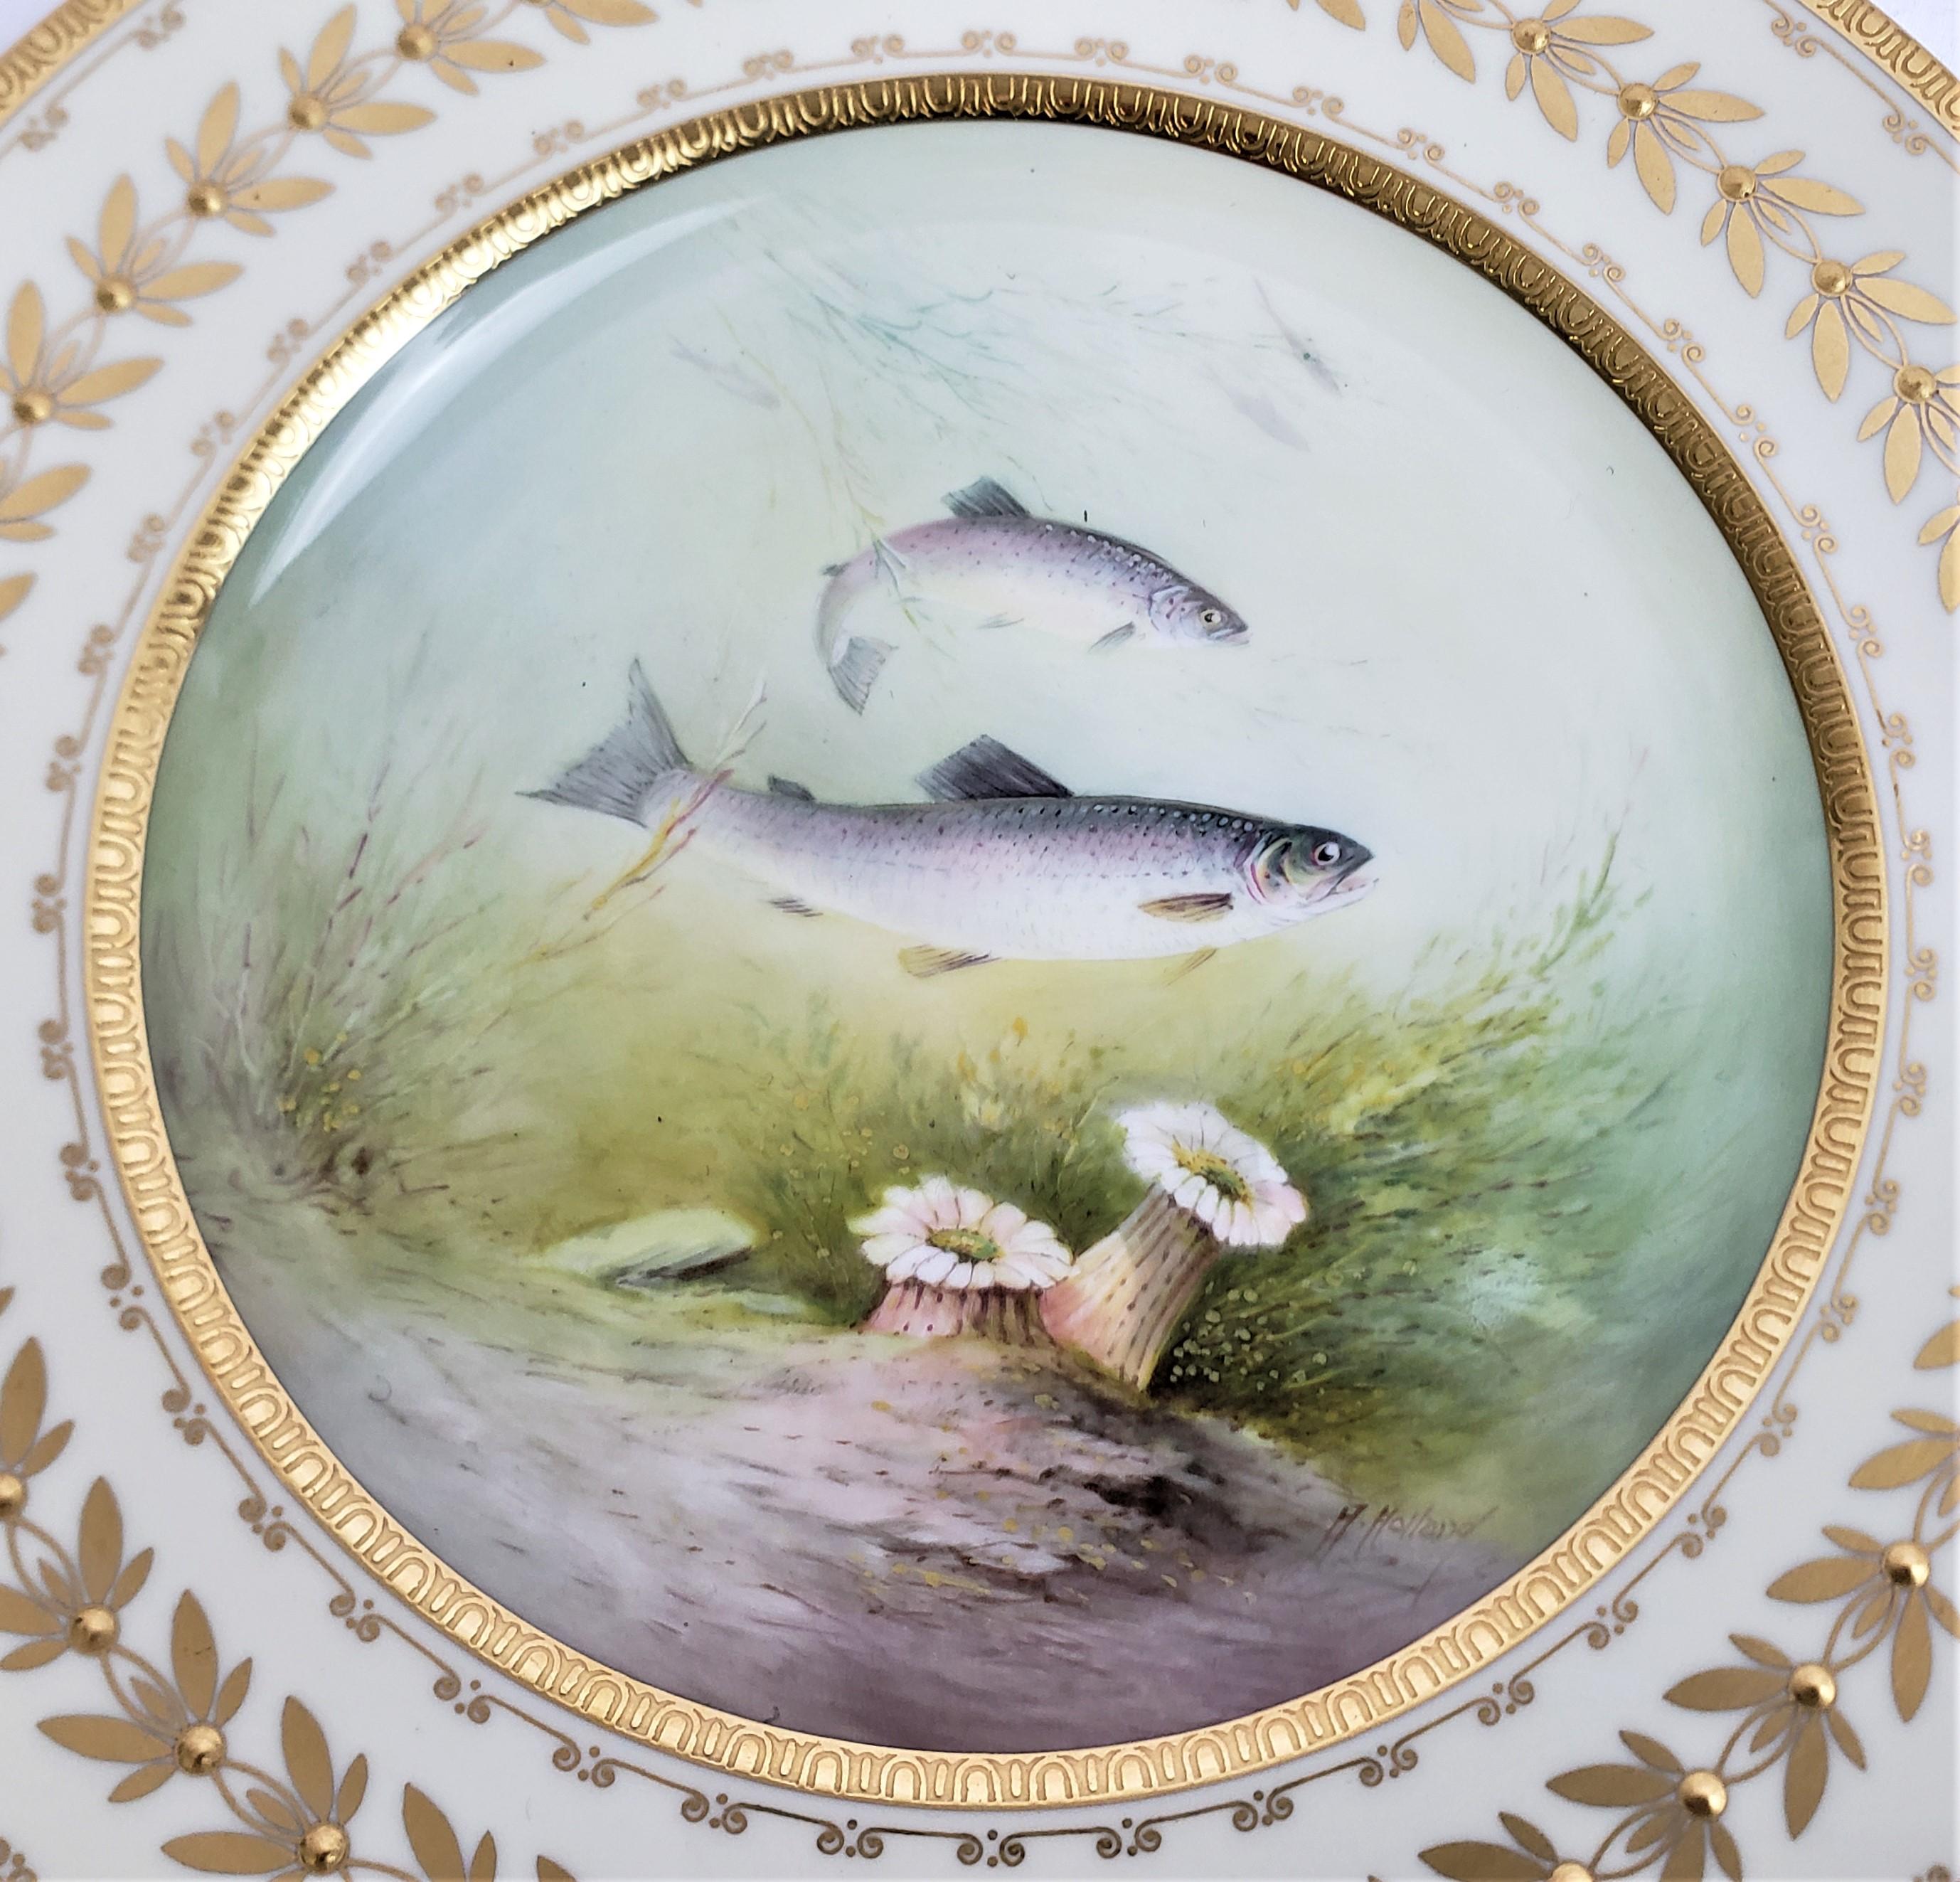 12 Antique Minton Hand-Painted Cabinet Plates Signed A. Holland Depicting Fish For Sale 1